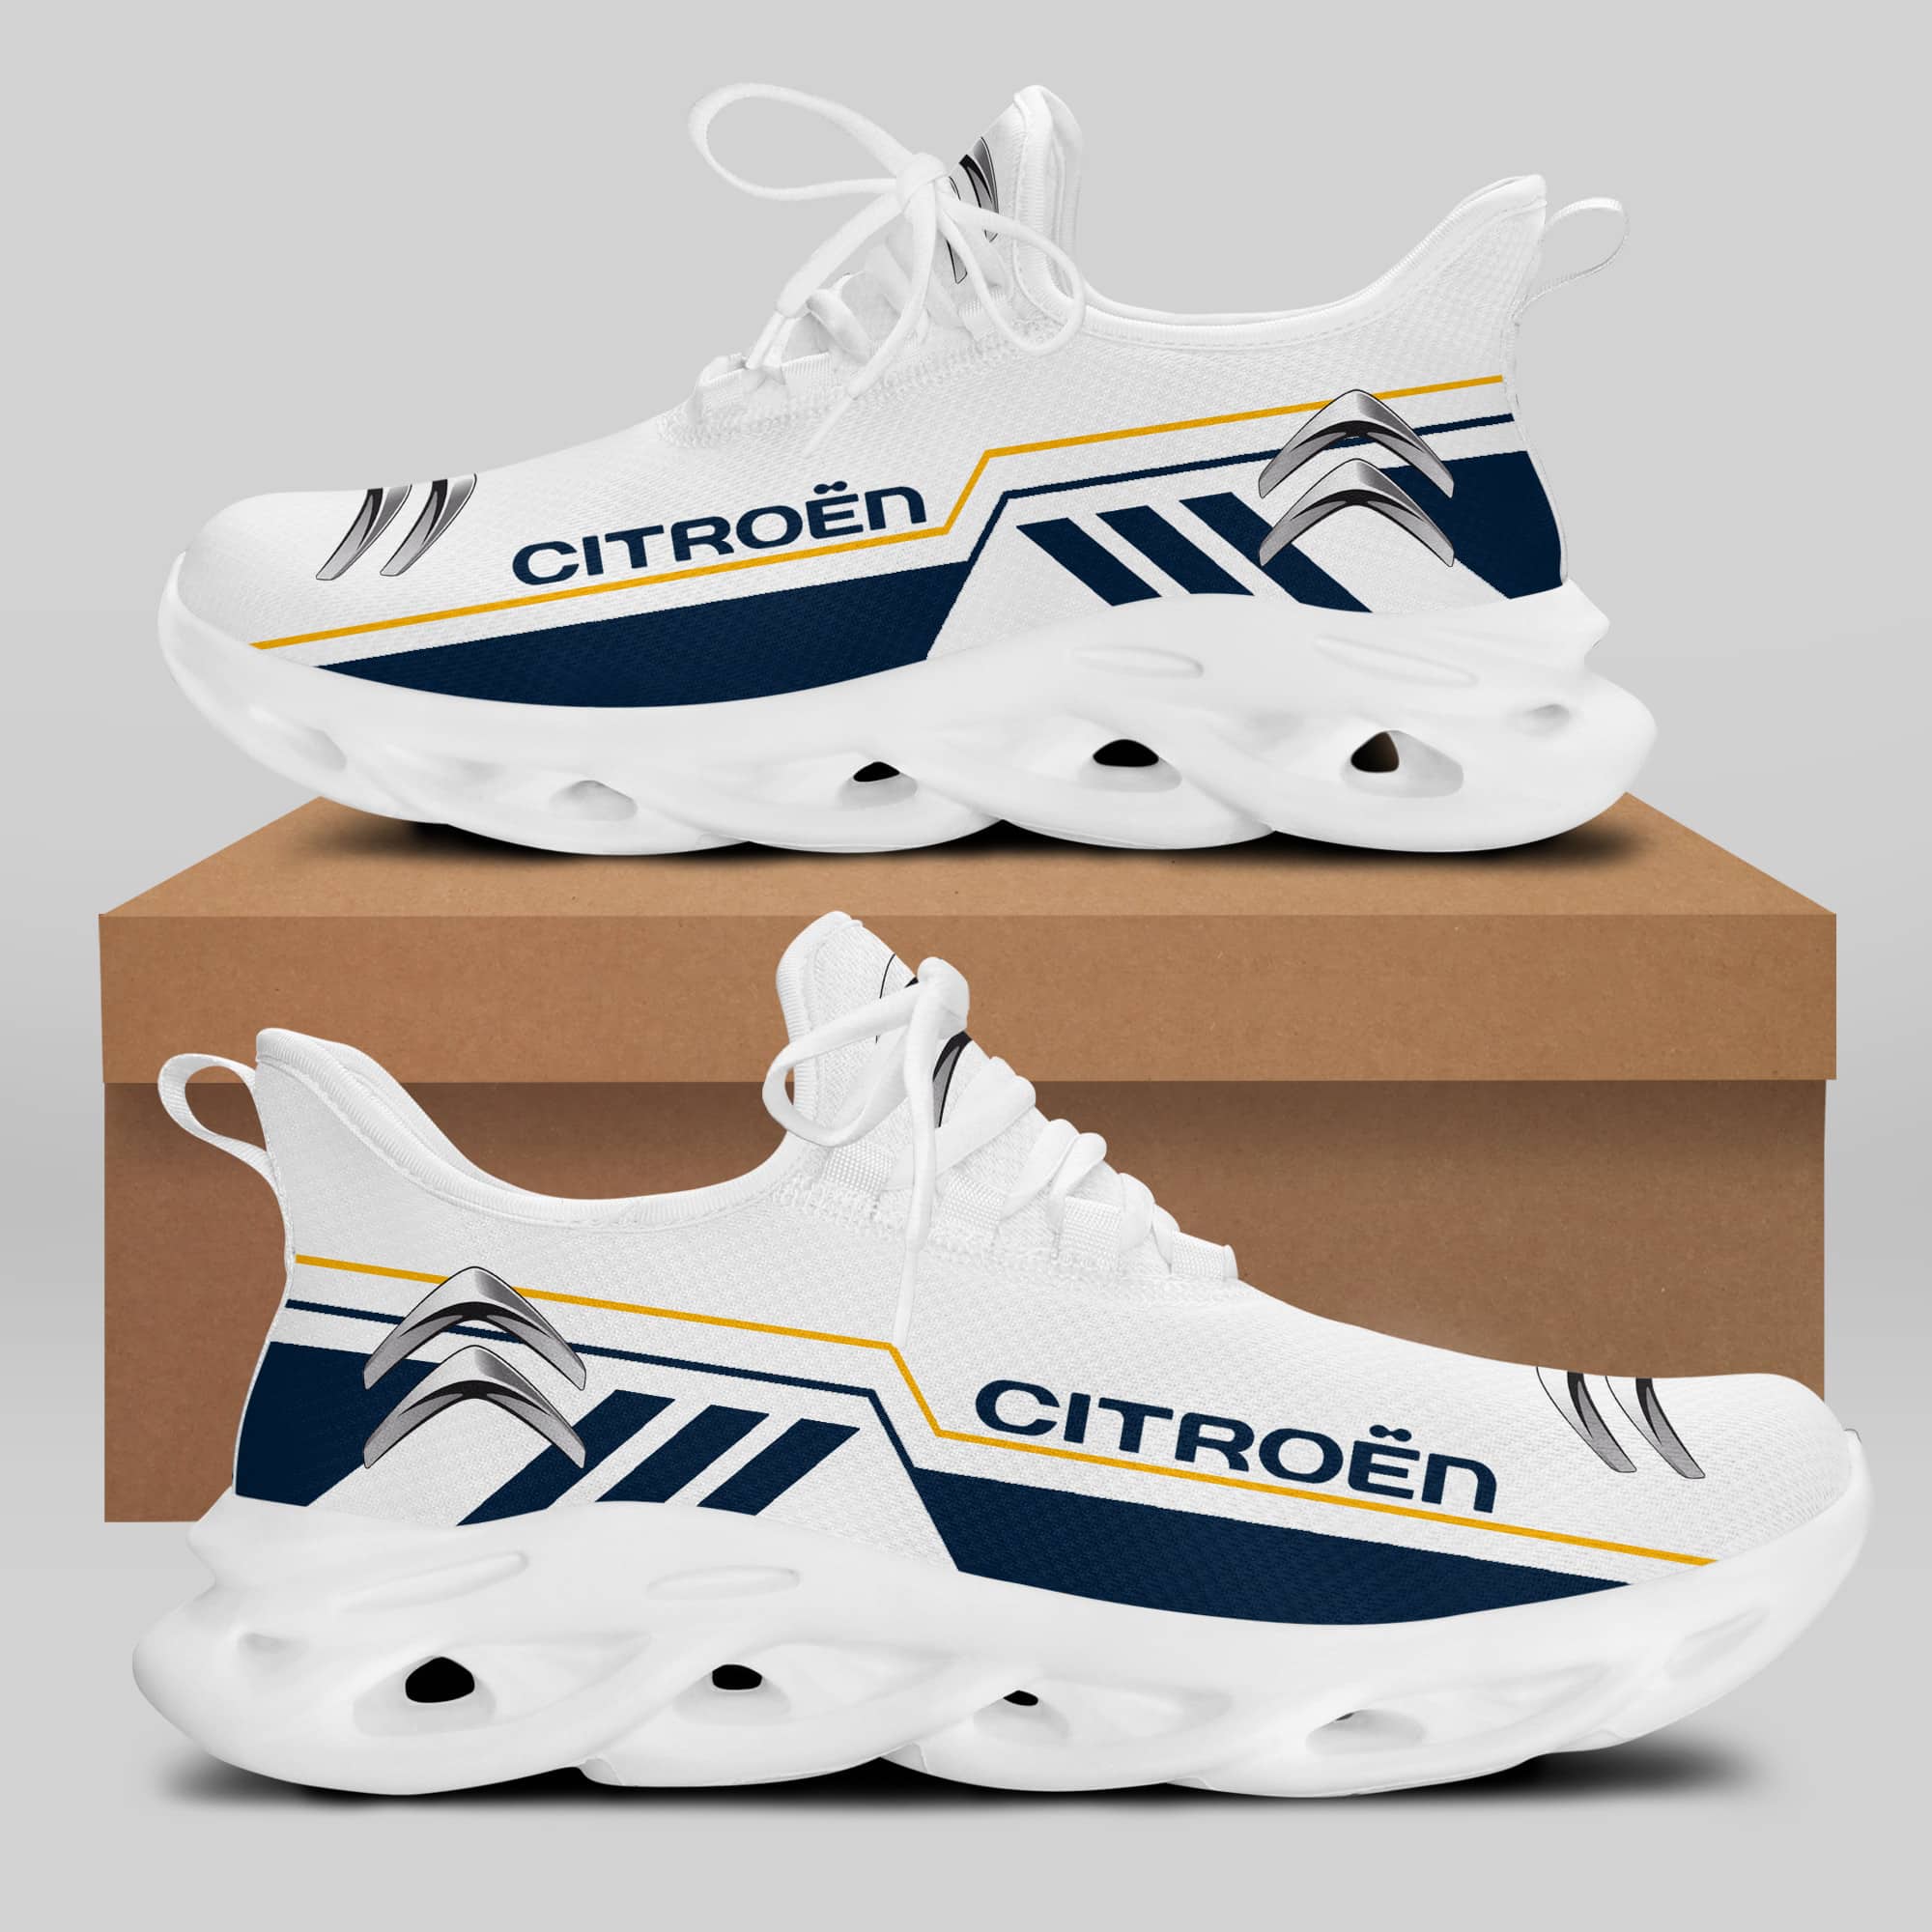 Citroën Running Shoes Max Soul Shoes Sneakers Ver 21 1